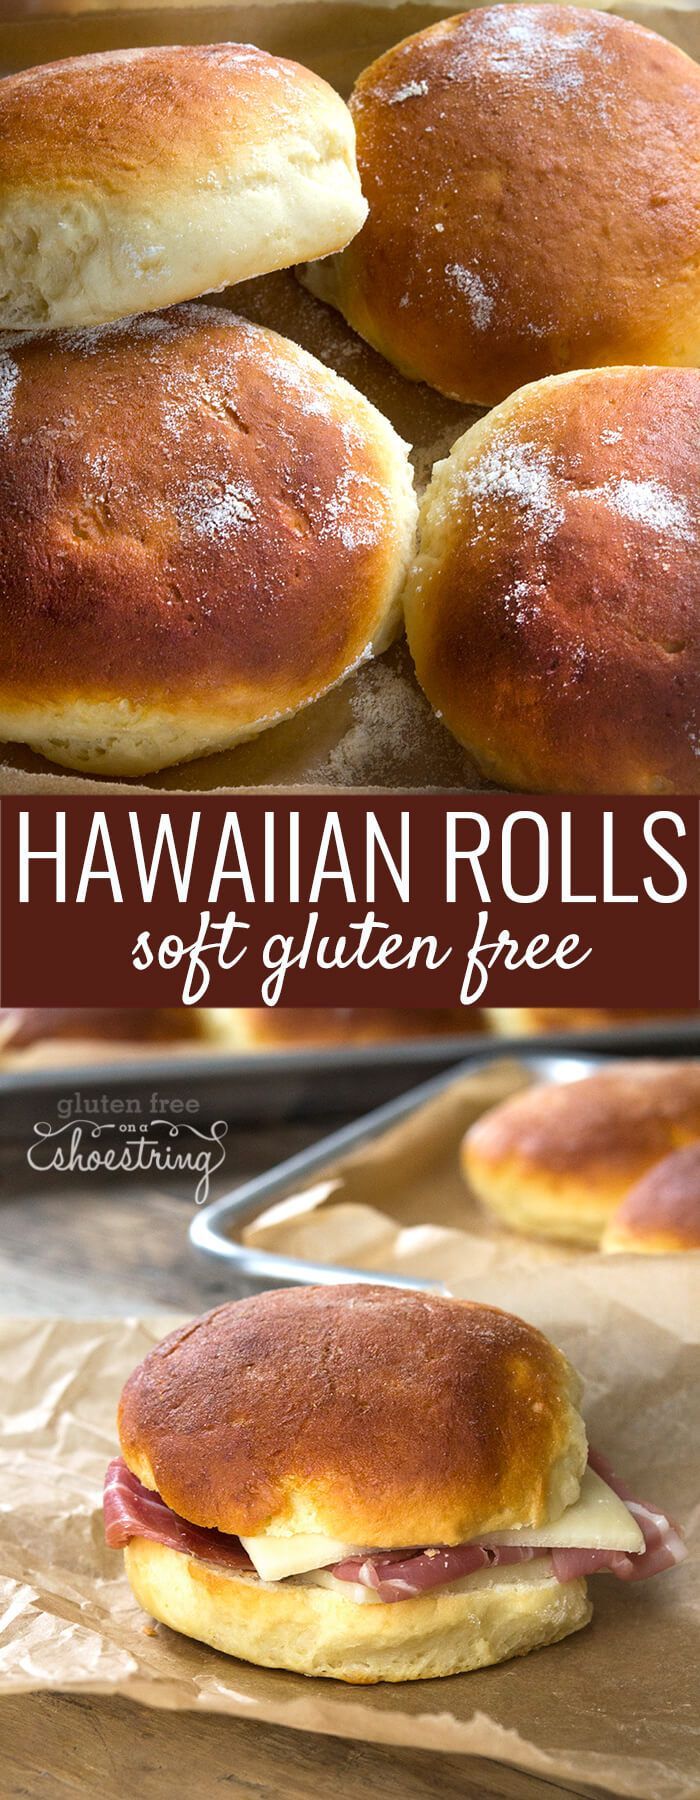 These super soft gluten free Hawaiian rolls are my favorite go-to rolls. Come see the recipe plus shaping